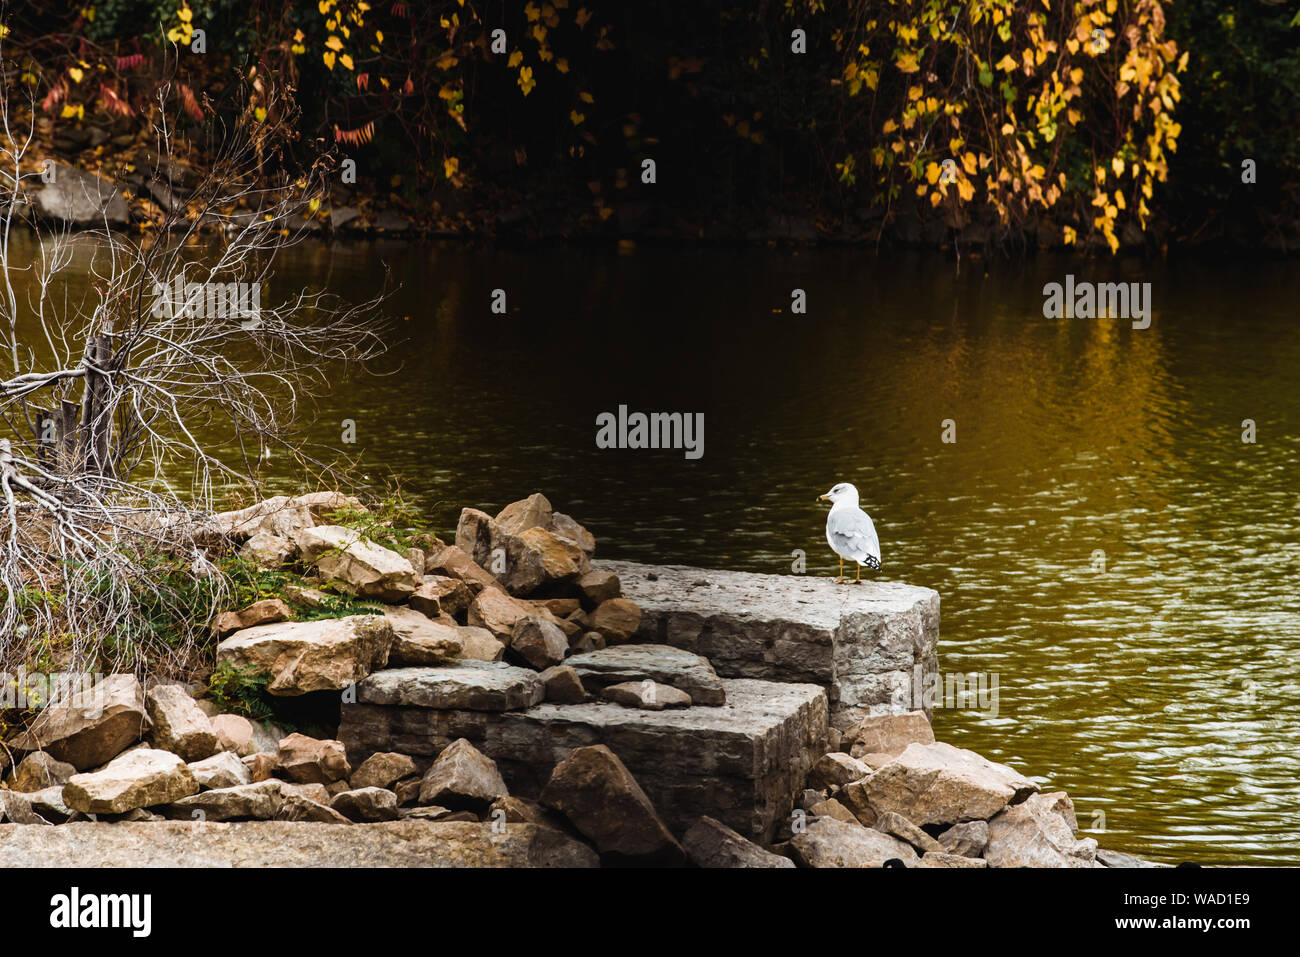 Seagulls standing on rocks next to a river in Appleton WI Stock Photo